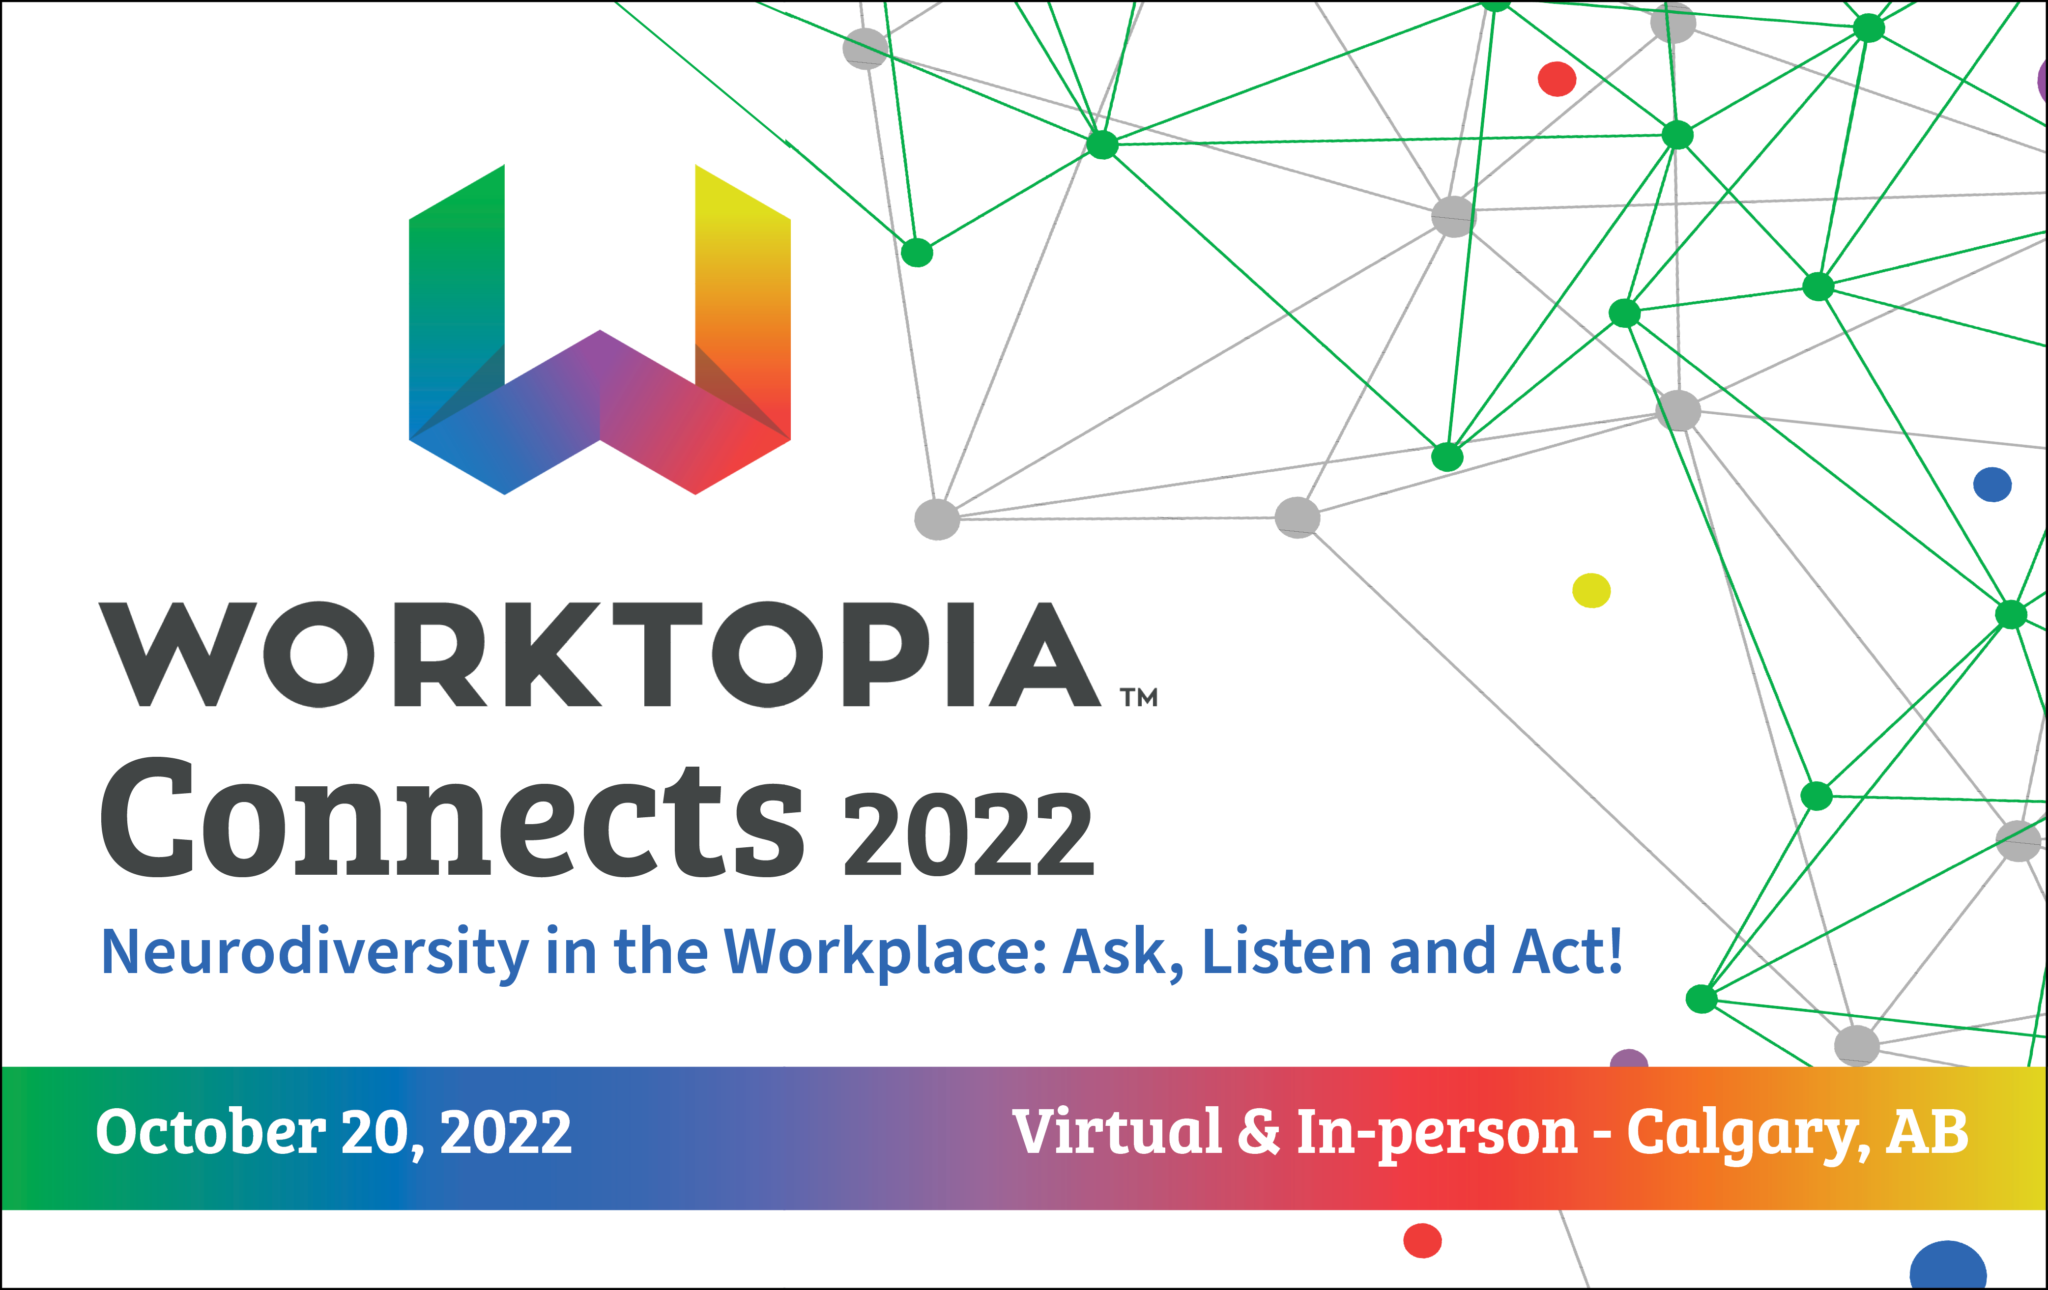 On a white background, in the left hand side of the image is the Worktopia logo, followed by the words, "Connects 2022, Neurodiversity in the Workplace: Ask, Listen and Act! There is a green, blue, yellow and orange gradient bar at the bottom of the image which reads, "October 20, 22 and the words, Virtual & In-person - Calgary, AB."